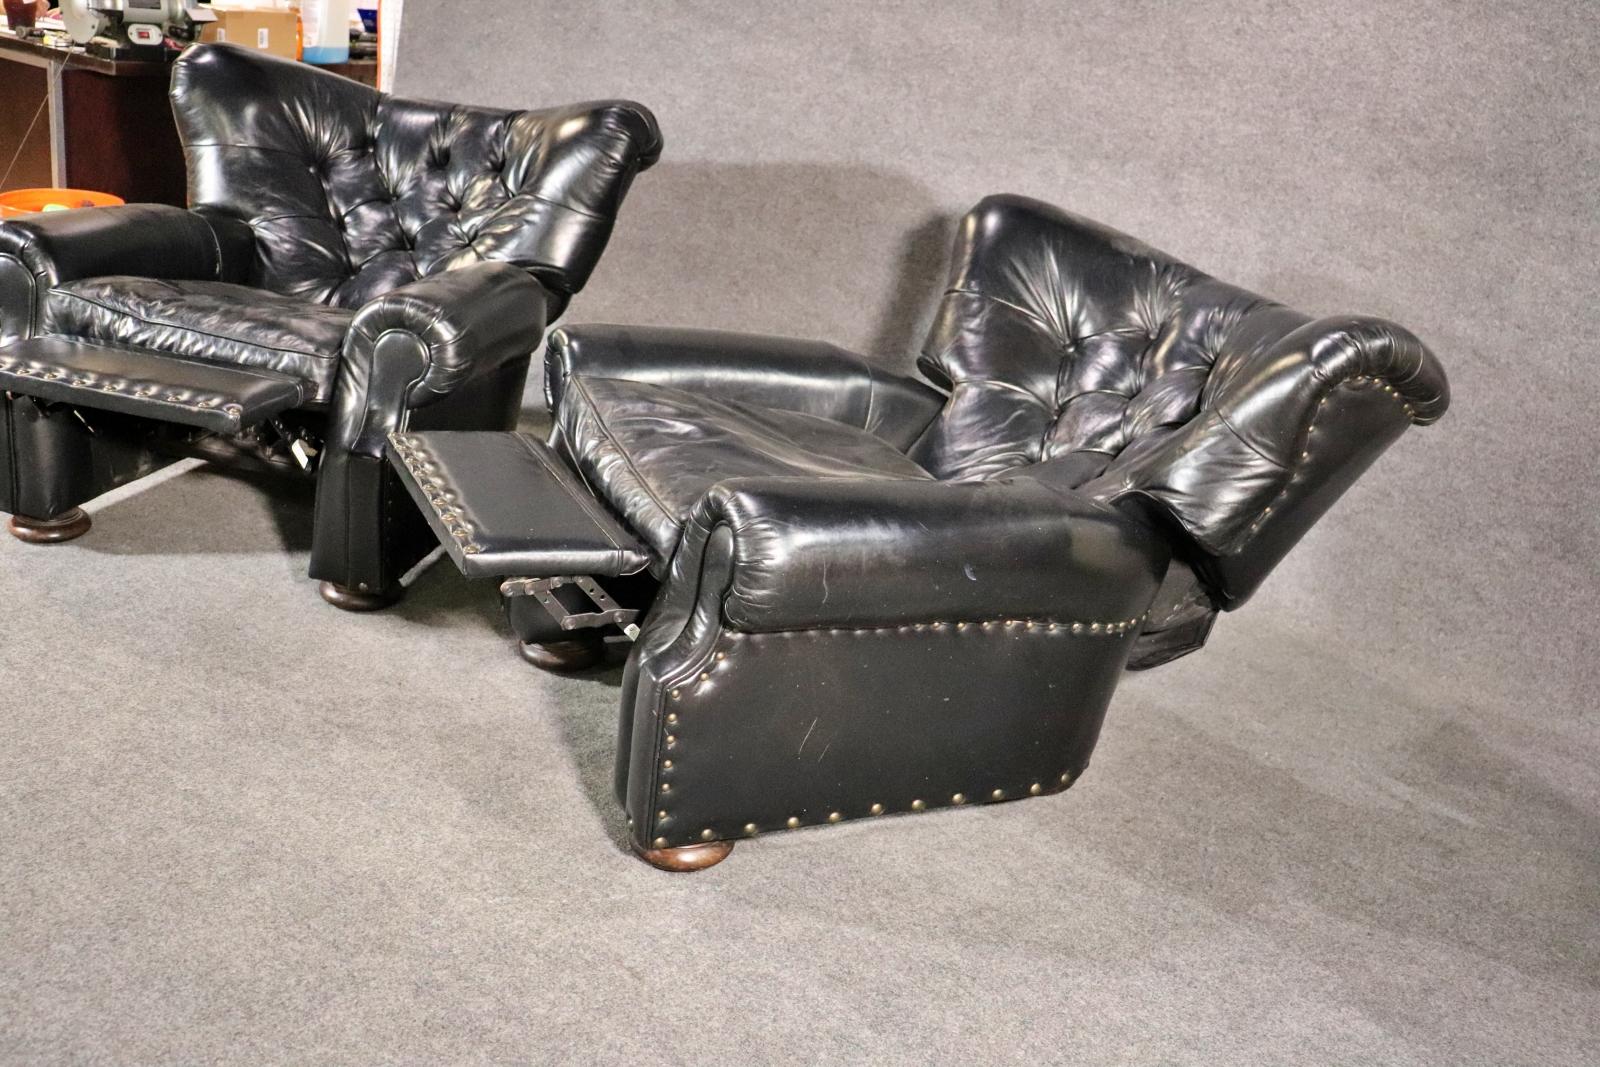 Pair of Tufted English Georgian Style Club Chairs Recliners  In Good Condition For Sale In Swedesboro, NJ